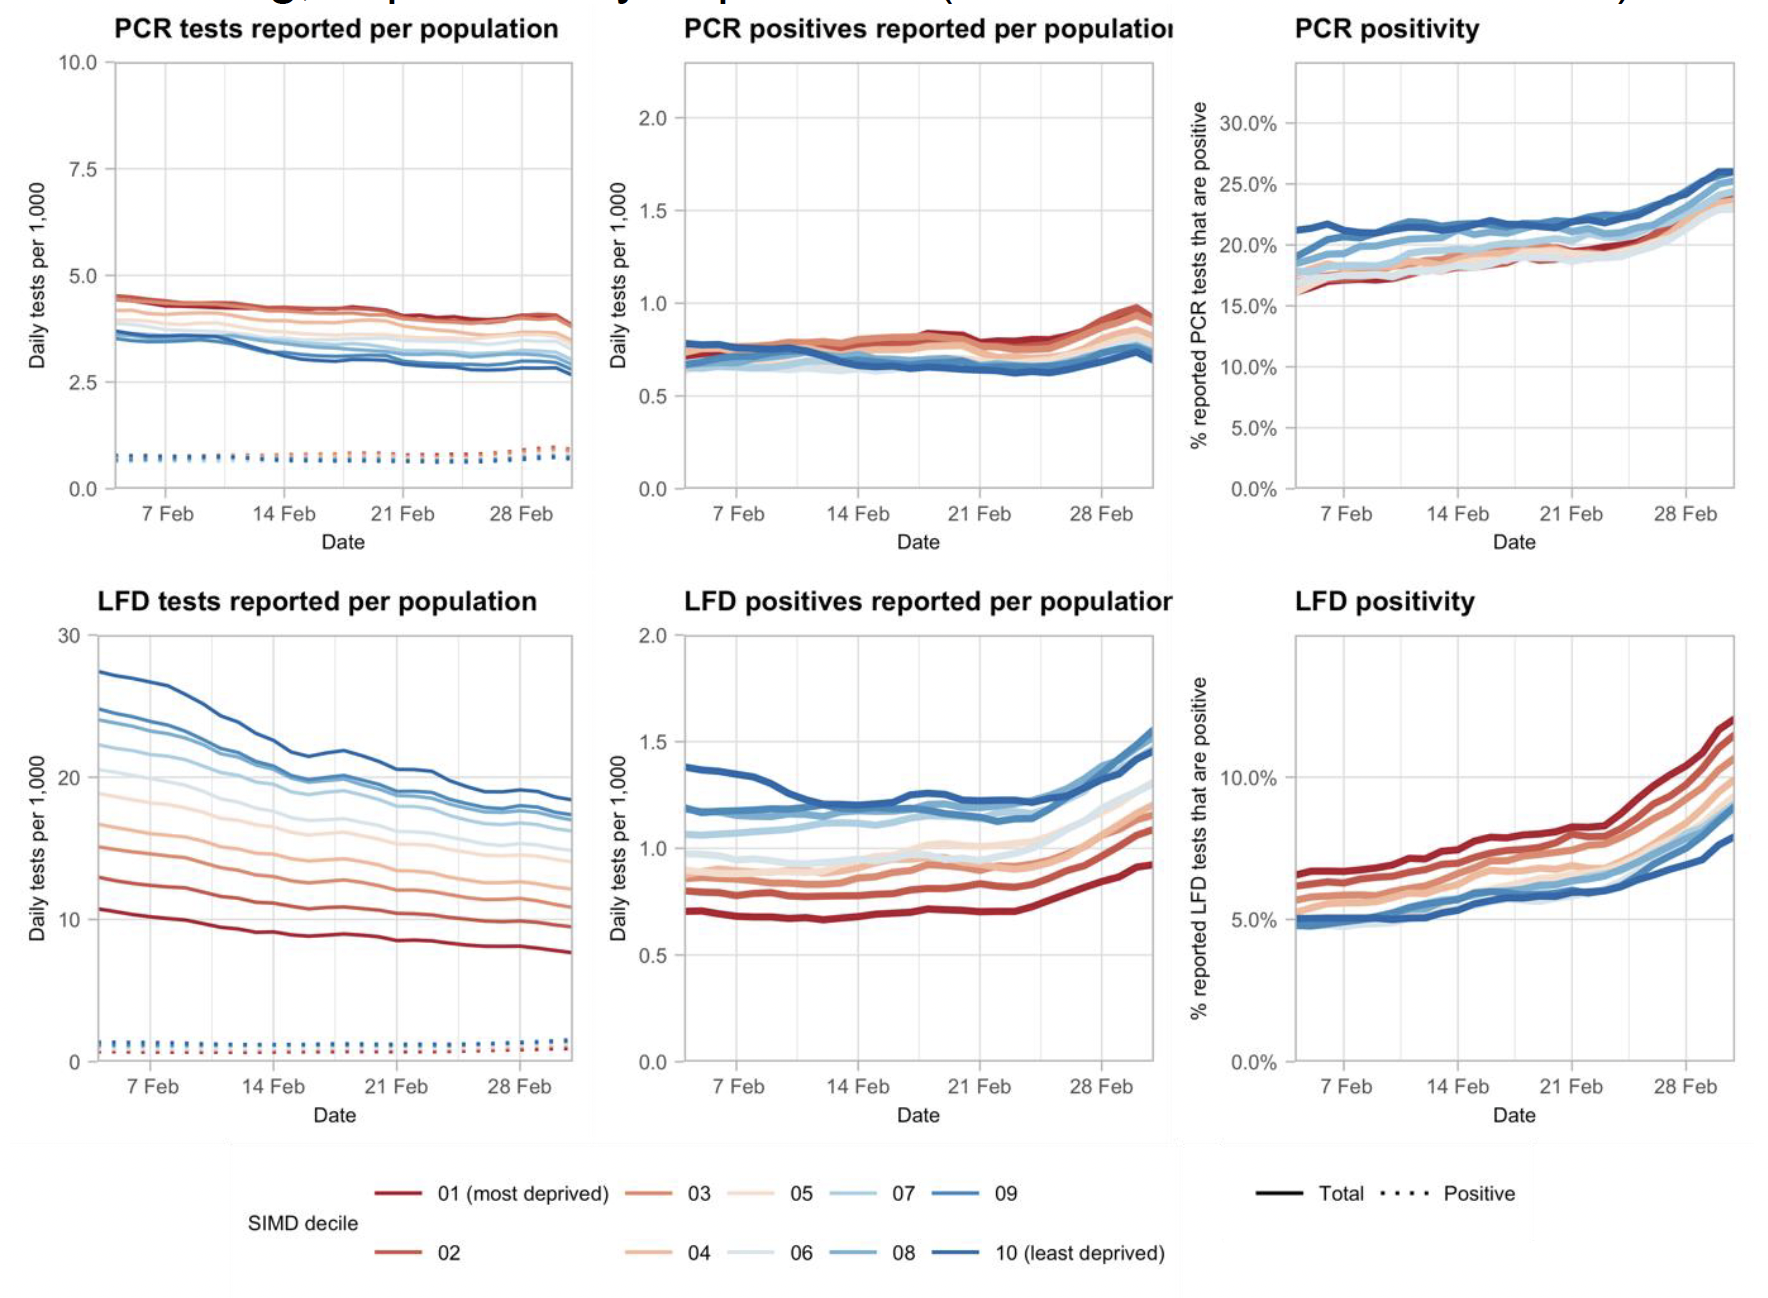 A series of line charts showing variations in testing outcomes comparing lateral flow and PCR testing, separated by deprivation (based on data to 3rd March.)